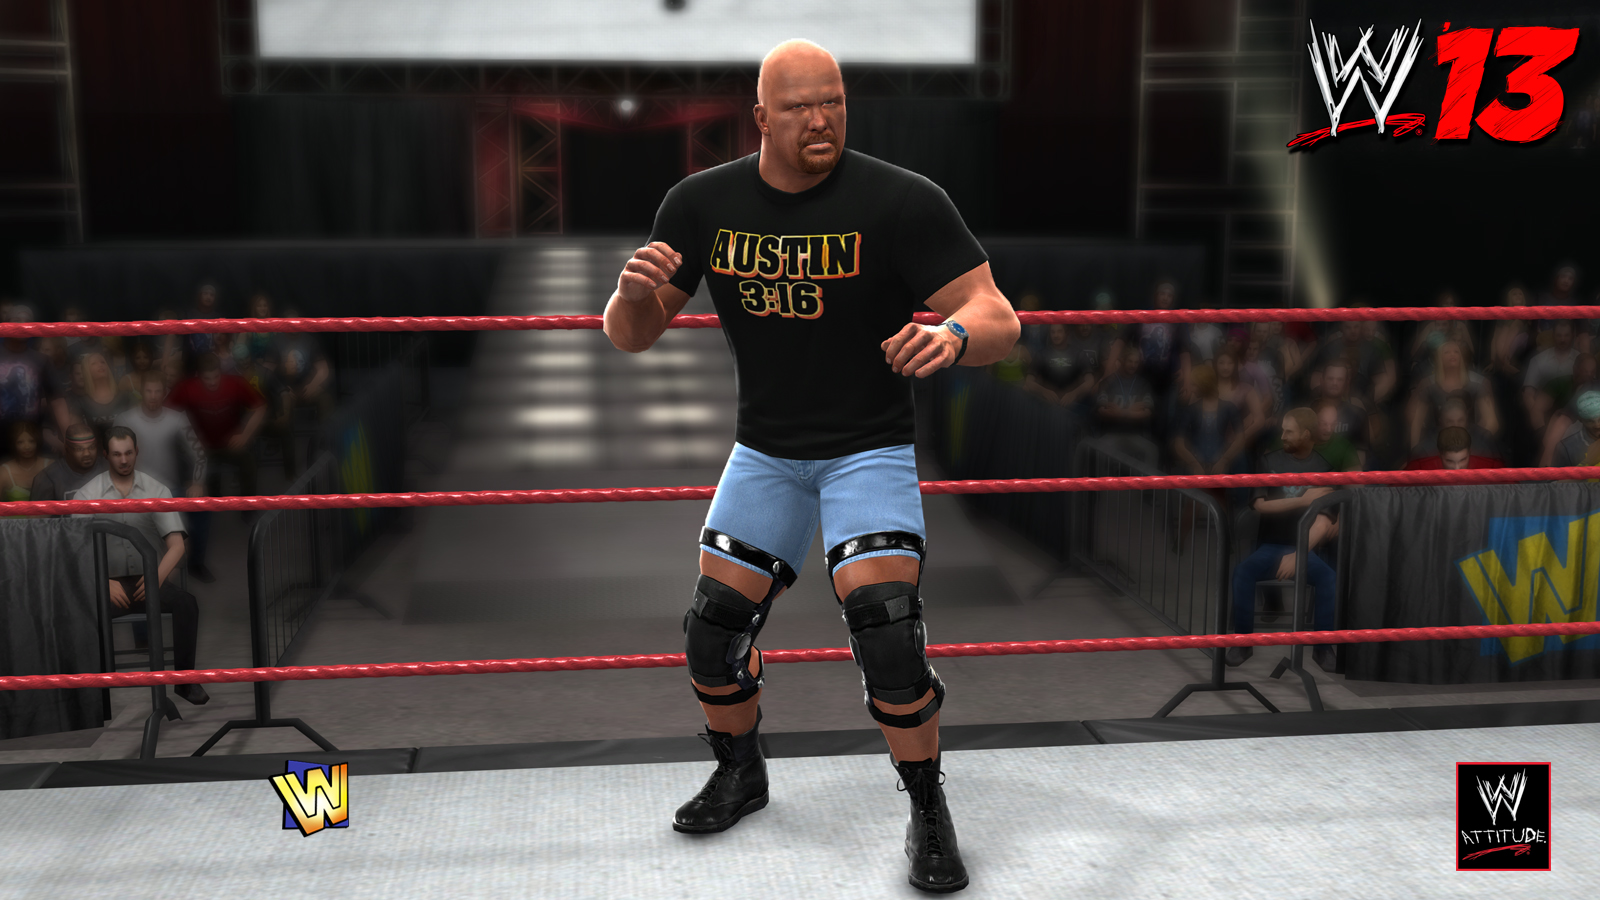 THQ Announces WWE ’13 Austin 3:16 Collectors Edition